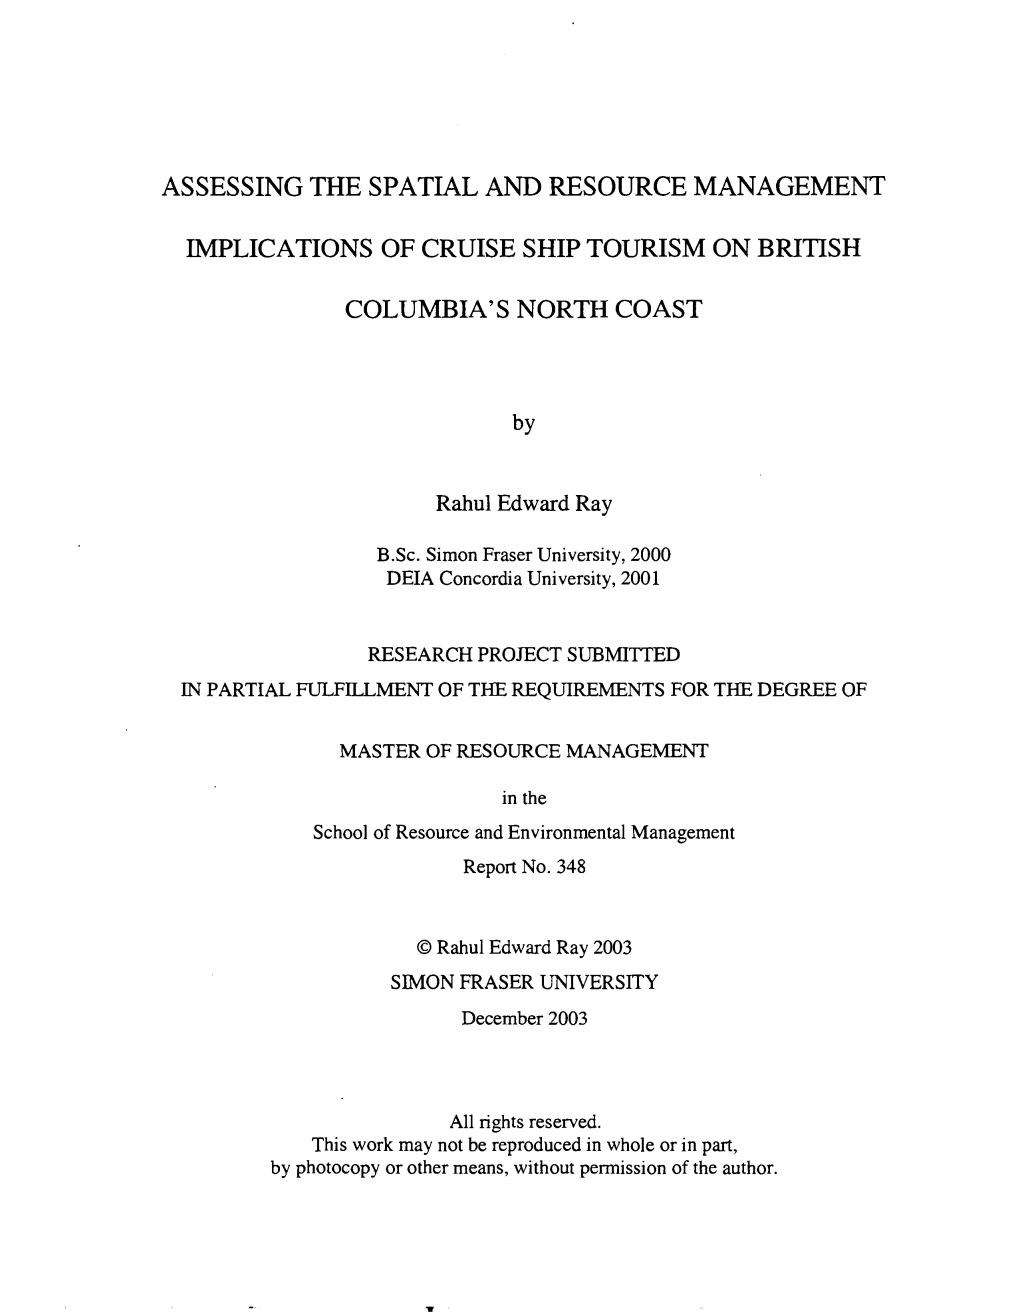 Assessing the Spatial and Resource Management Implications of Cruise Ship Tourism on British Columbia's North Coast